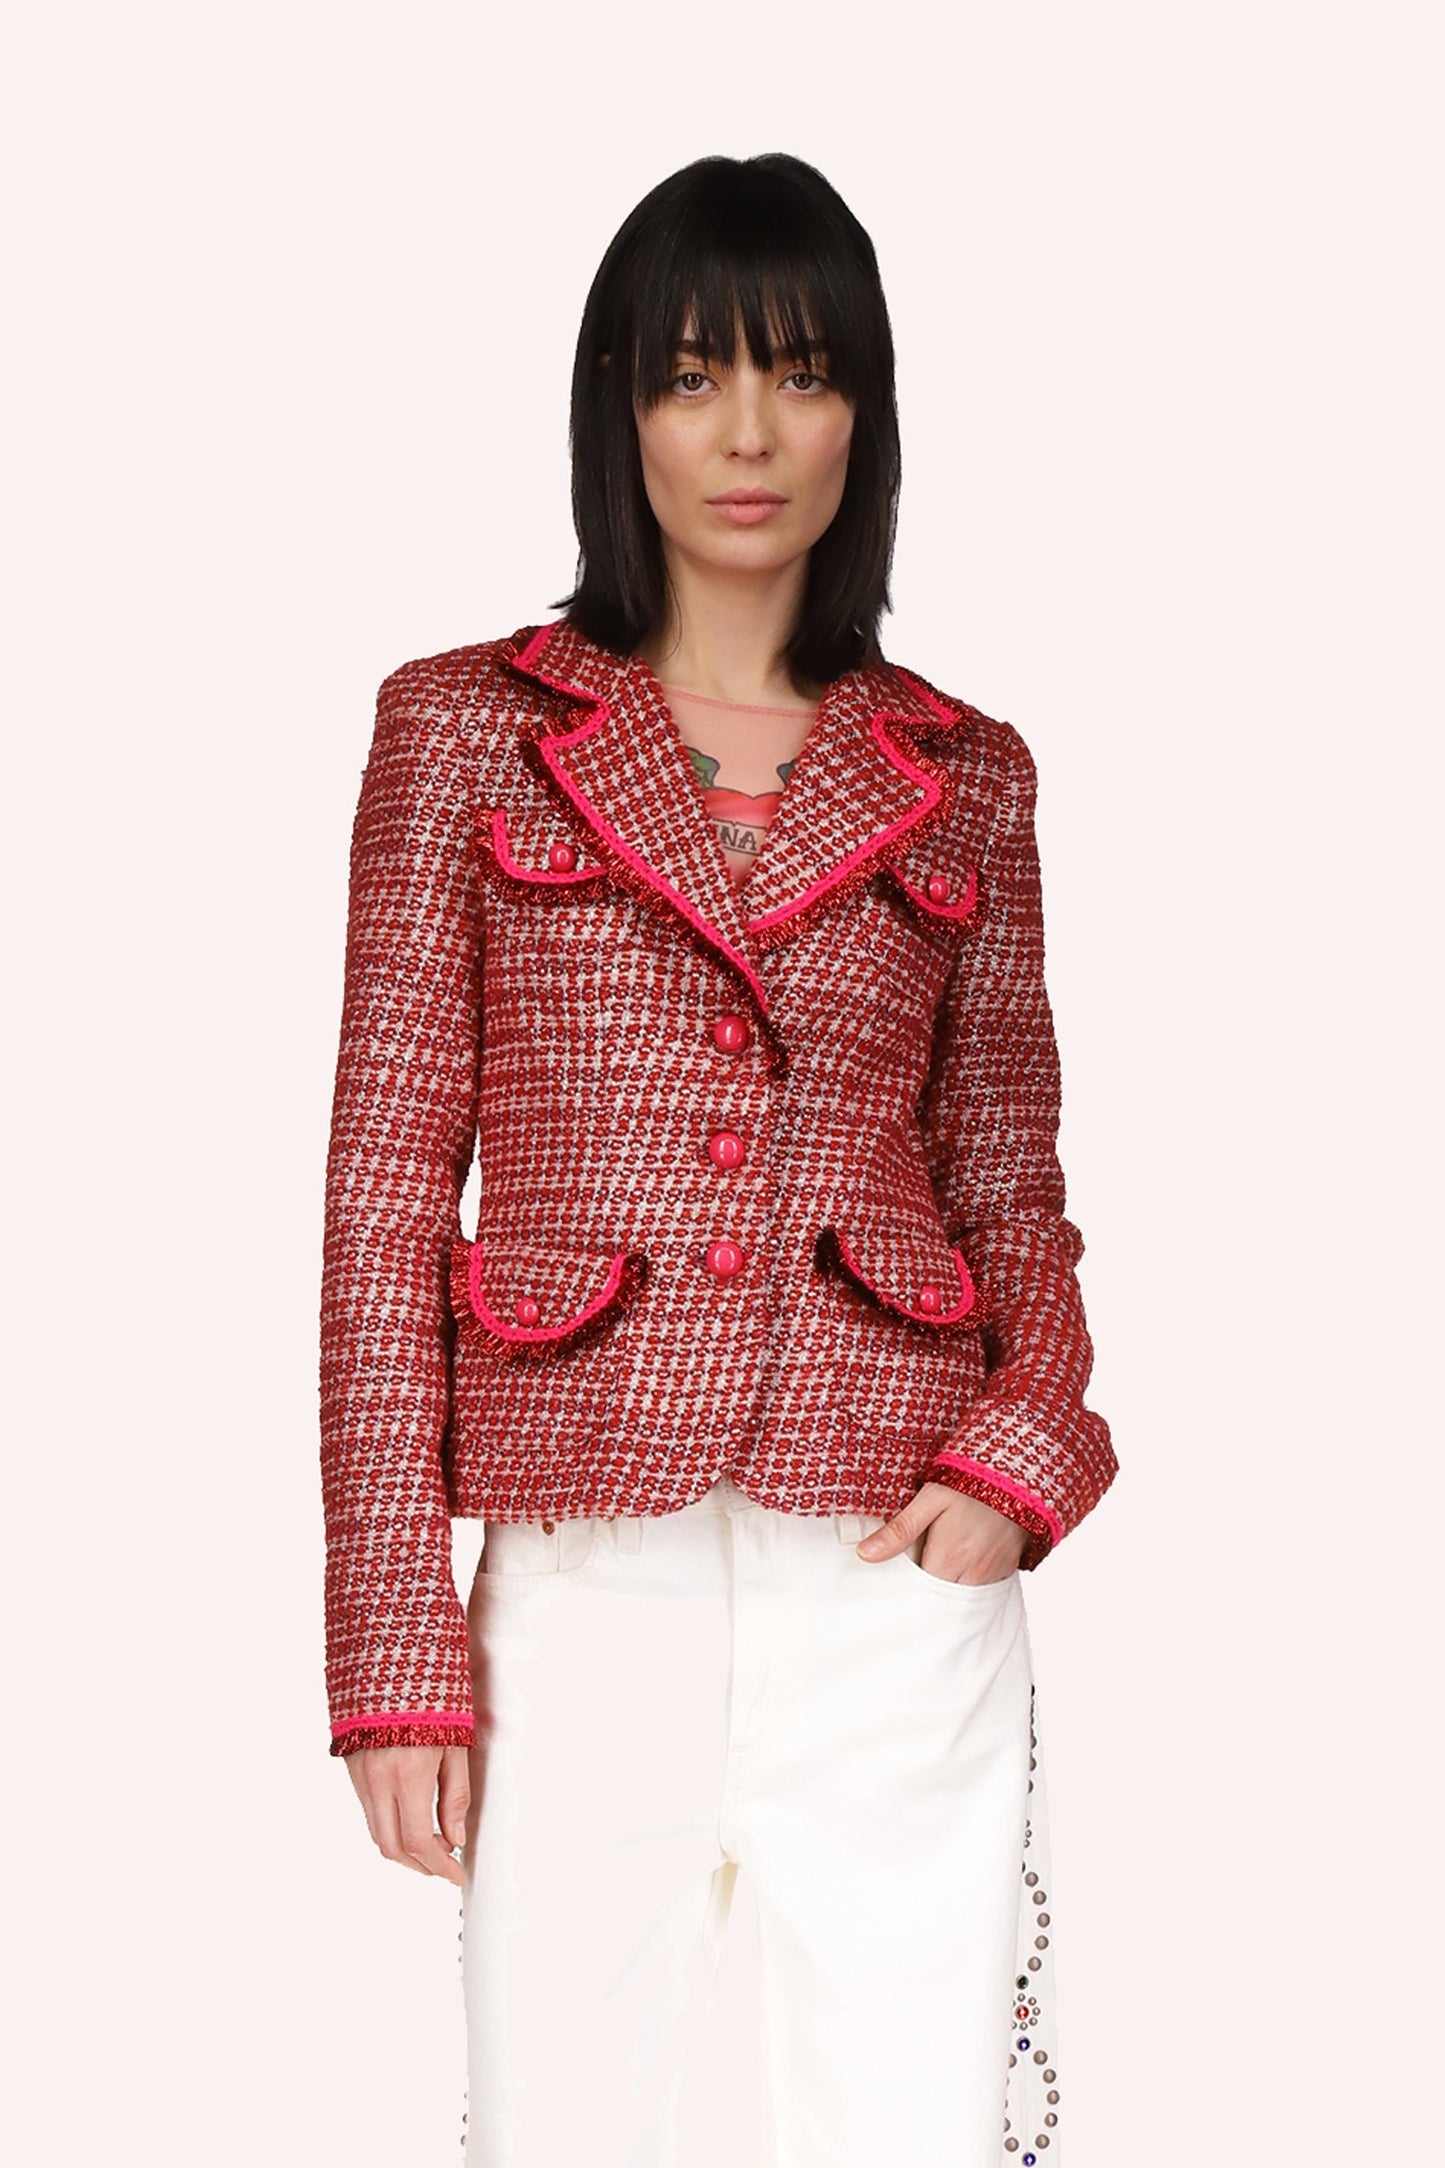 Blazer Ruby texture is a beige background, with red dots like on top, all hems are highlighted in red